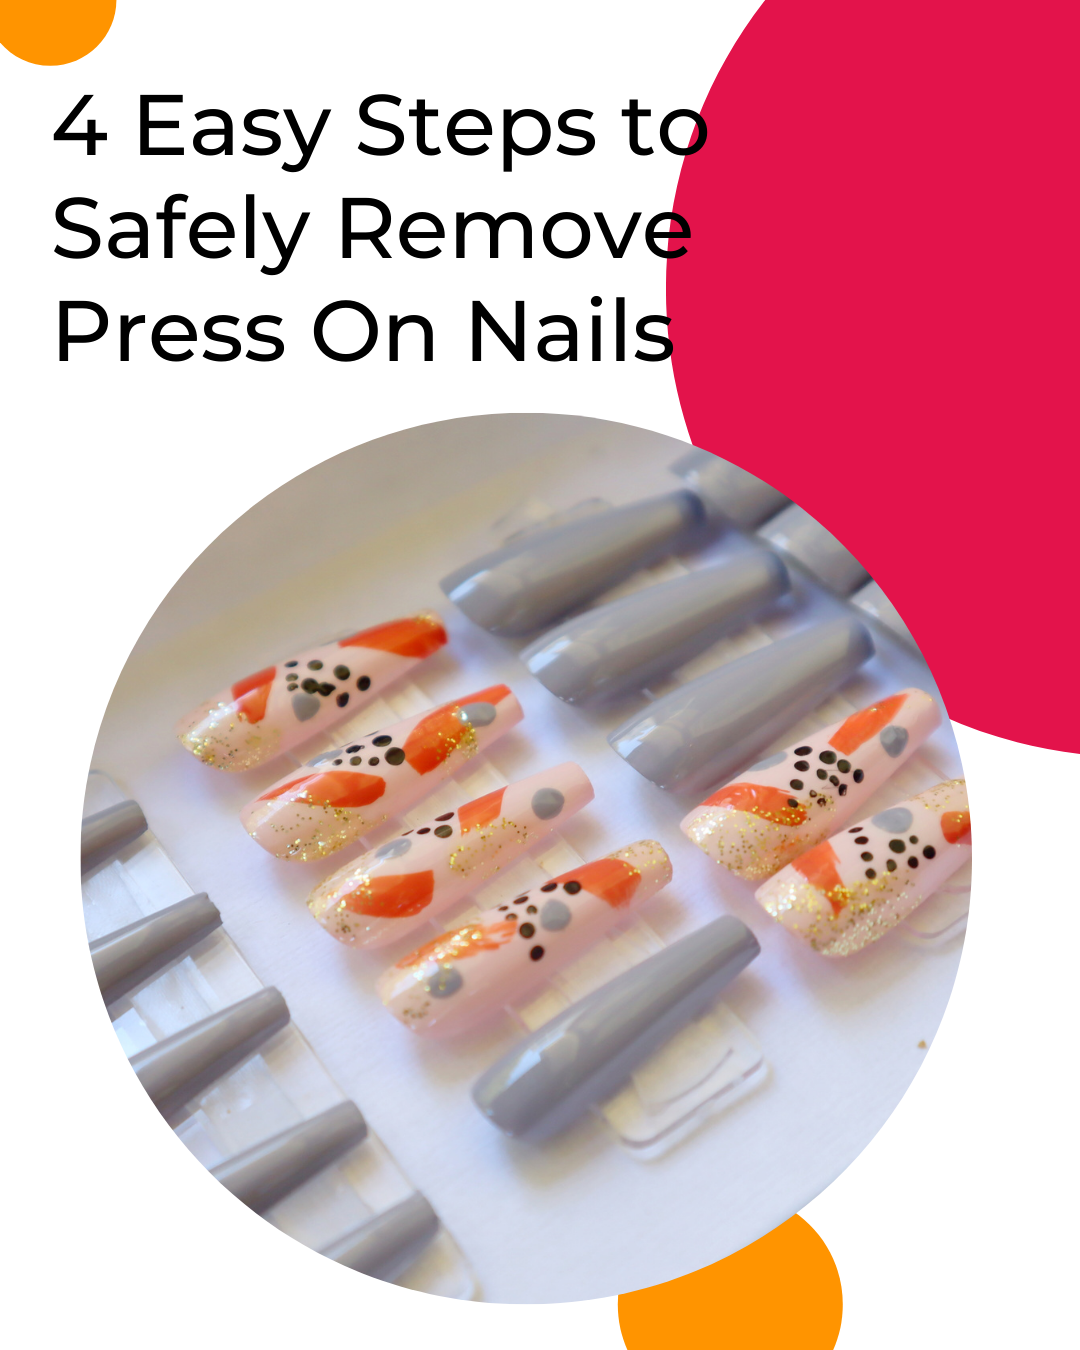 Steps to Safely Remove Press On Nails